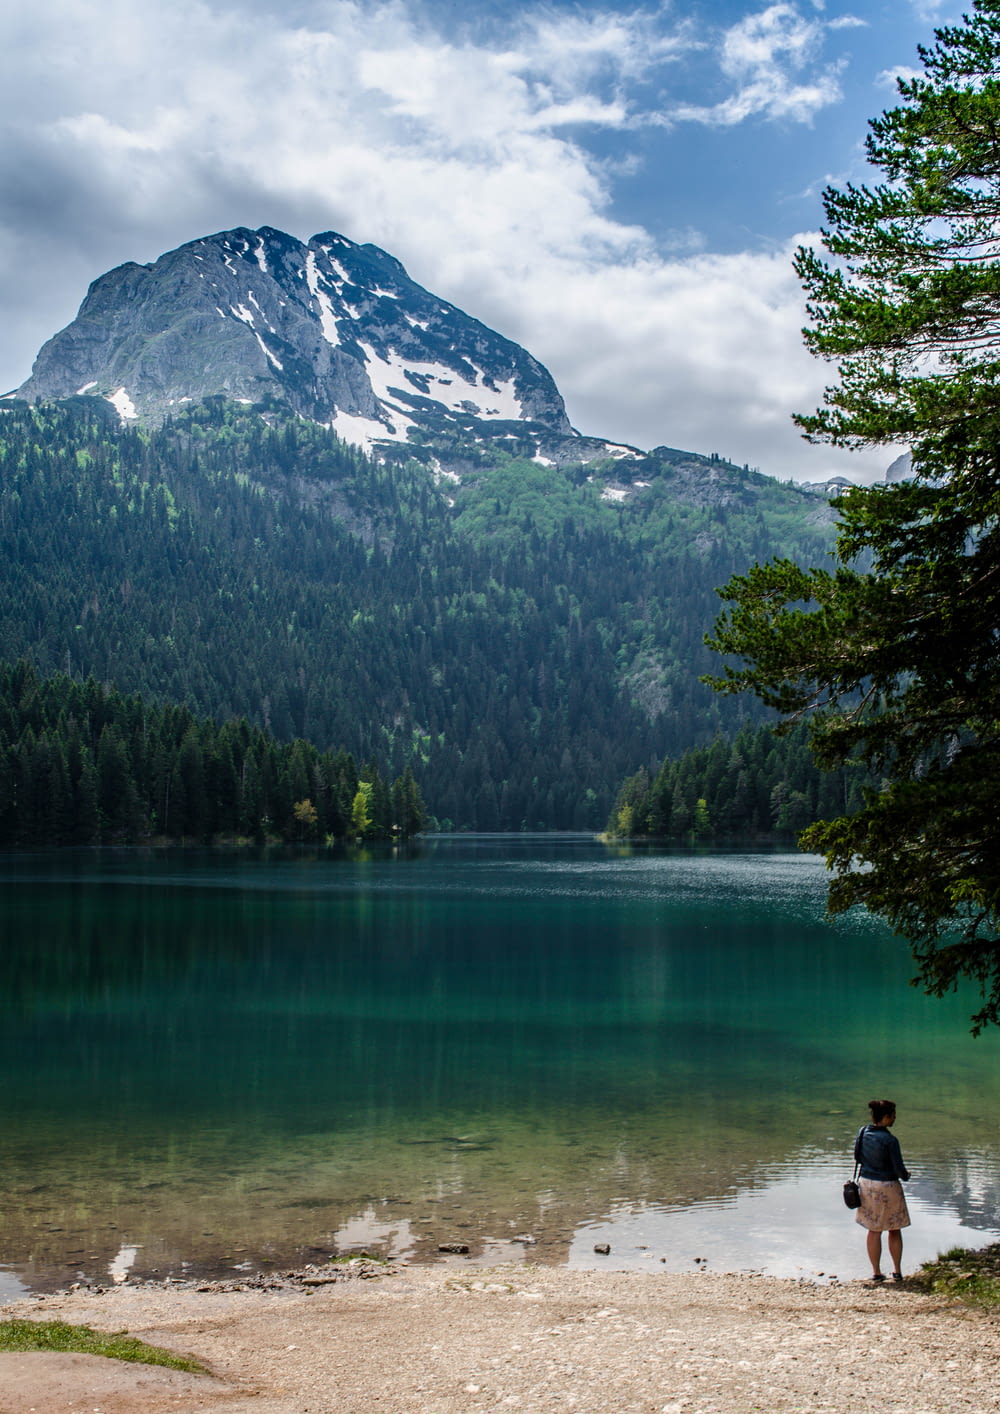 a person standing next to a lake with a mountain in the background